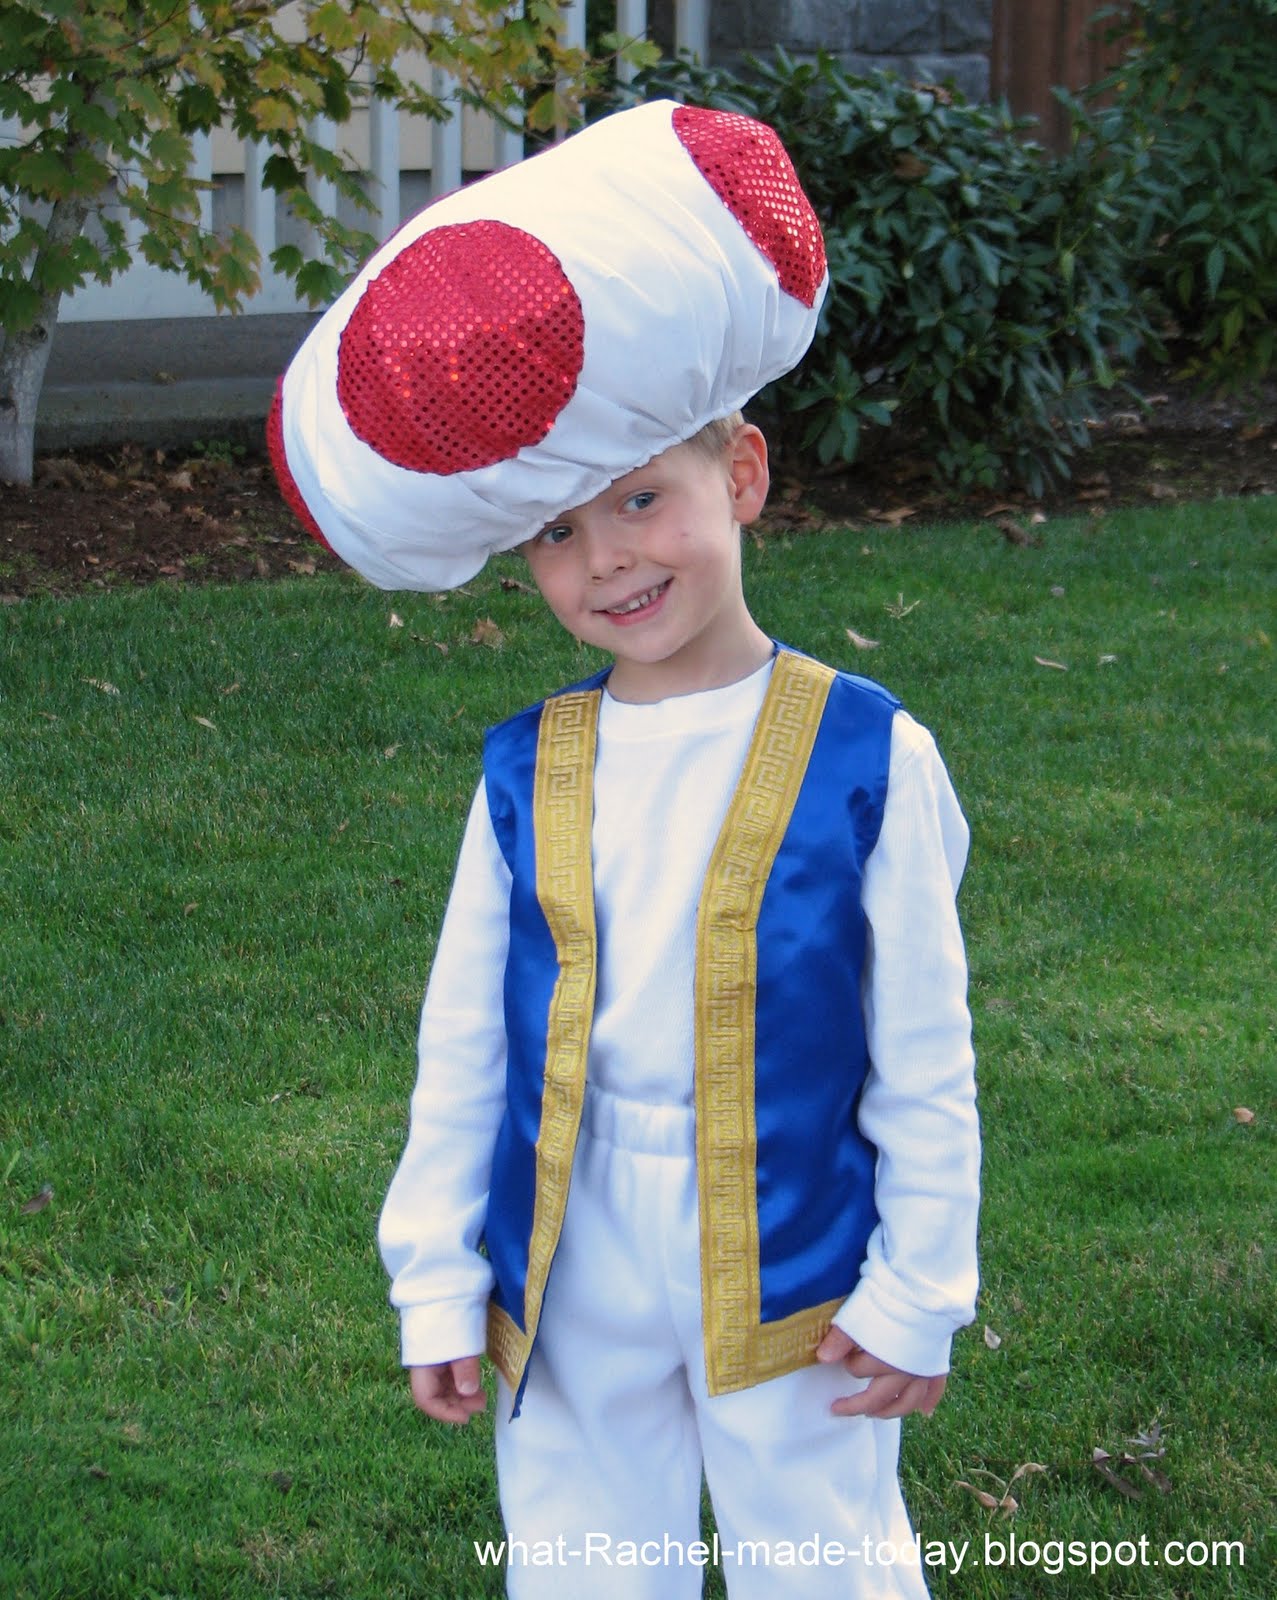 Step-by-Step Guide: Making a Mario Toad Costume